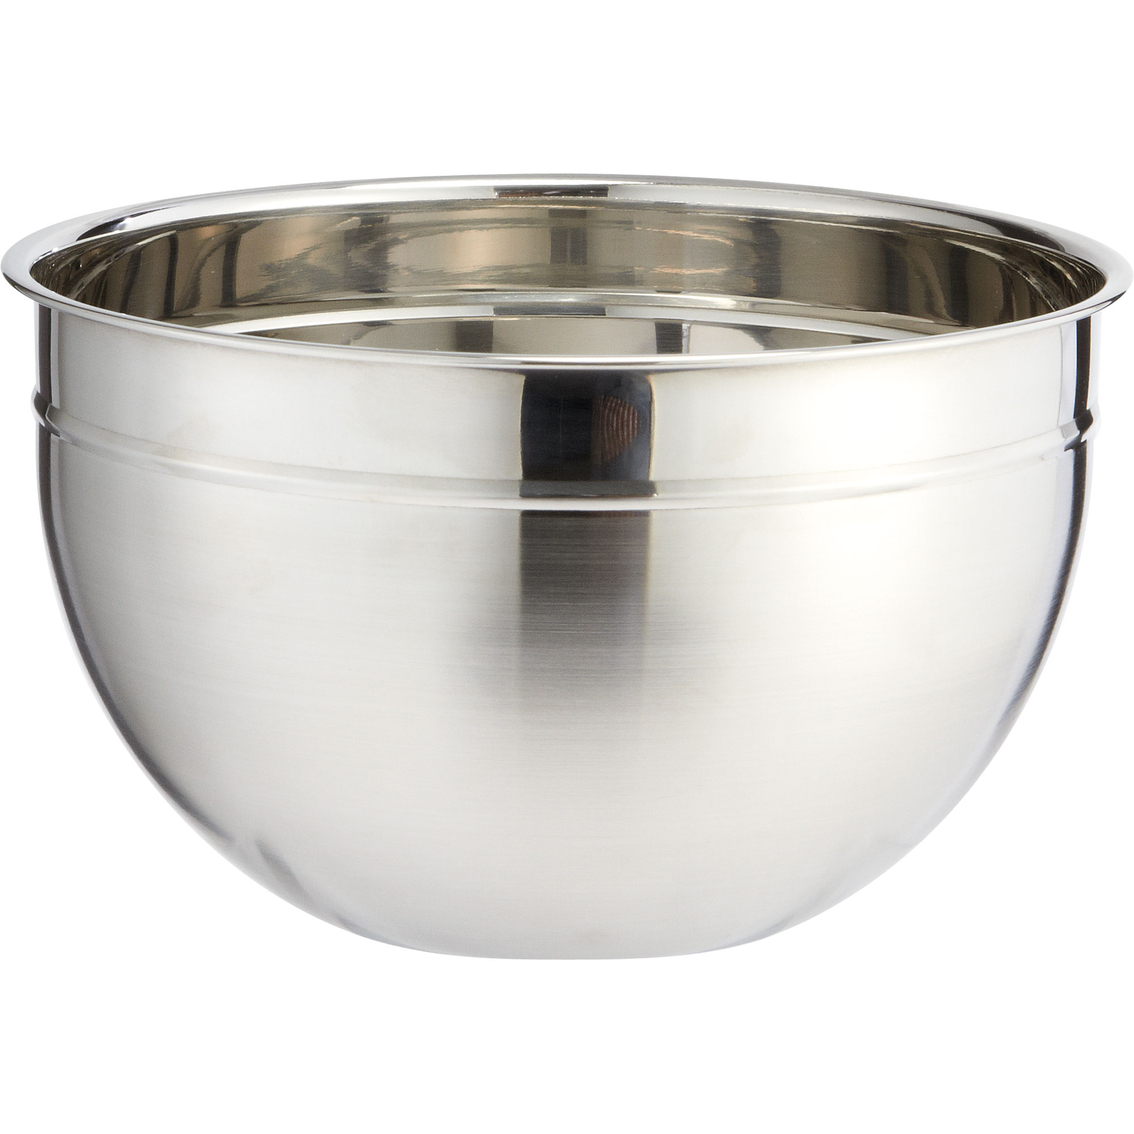 Simply Perfect 3 pc. Mixing Bowl Set - Image 3 of 4